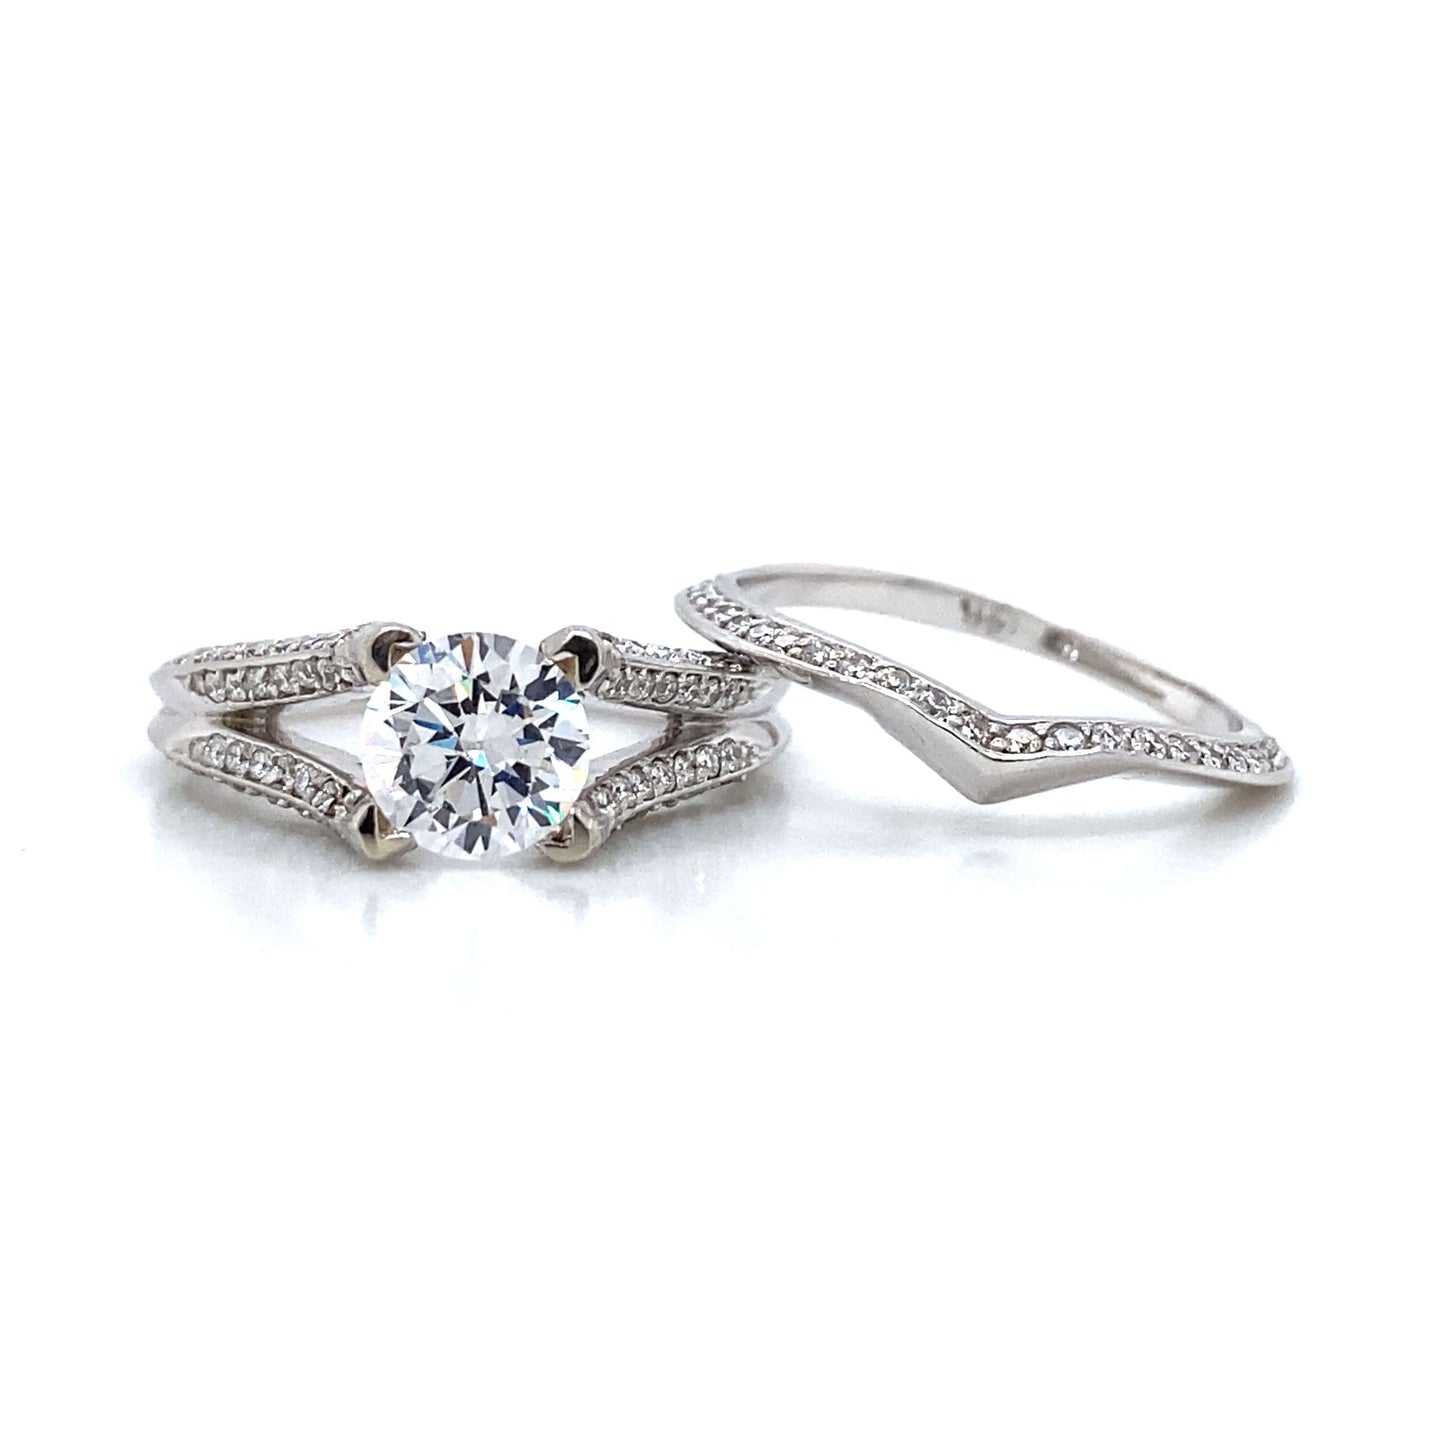 Pave Engagement Set in 14K White Gold